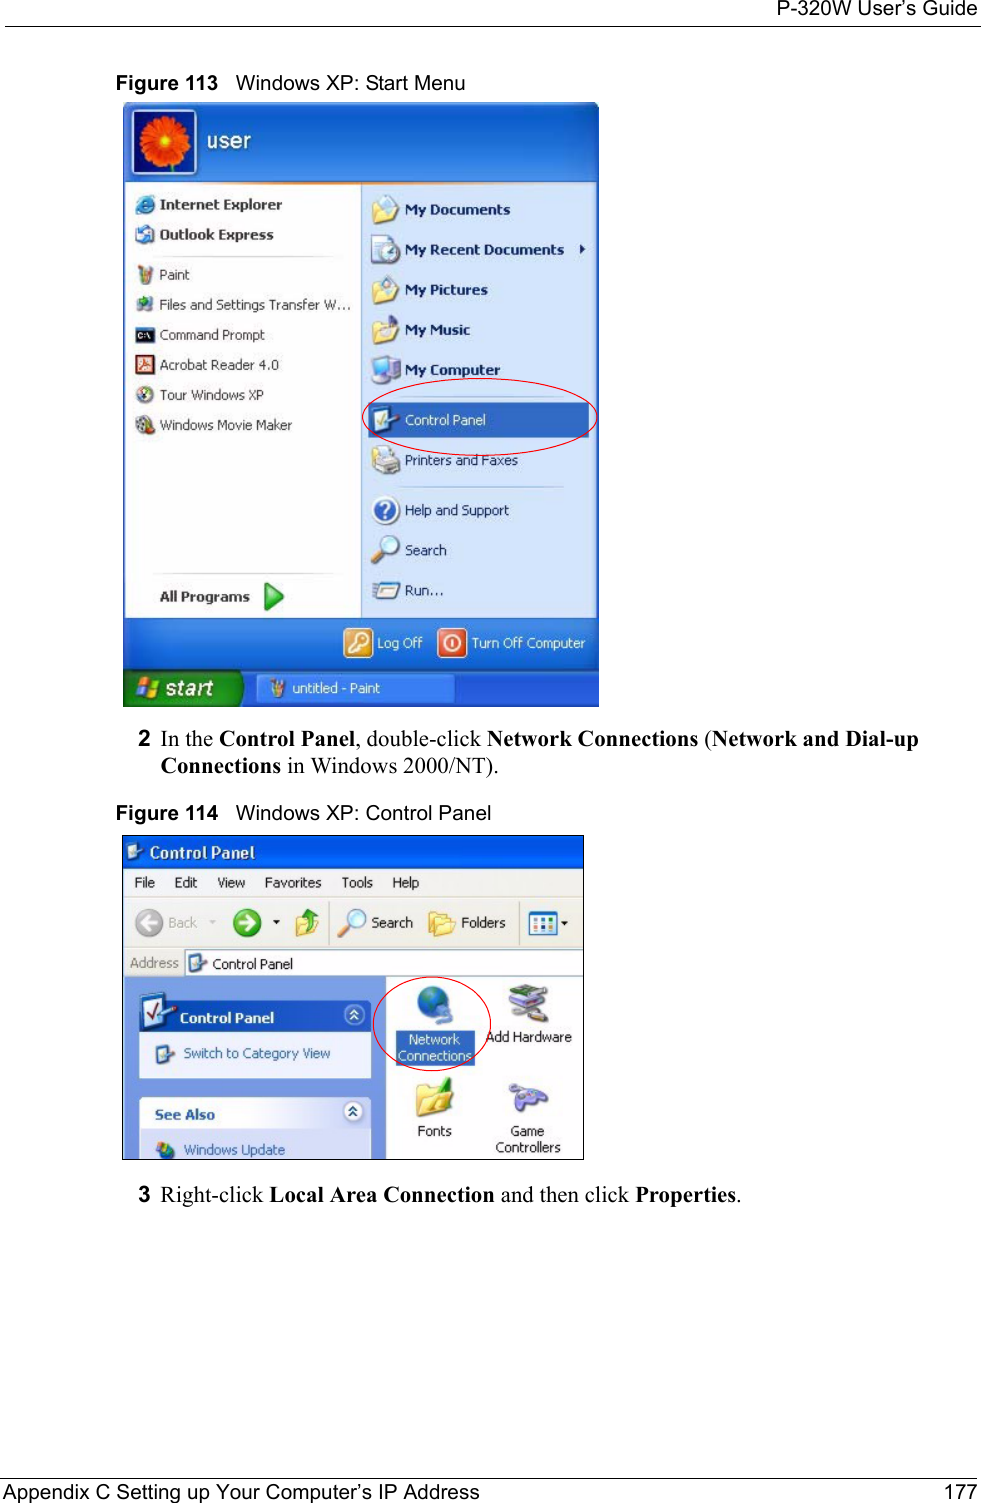 P-320W User’s GuideAppendix C Setting up Your Computer’s IP Address 177Figure 113   Windows XP: Start Menu2In the Control Panel, double-click Network Connections (Network and Dial-up Connections in Windows 2000/NT).Figure 114   Windows XP: Control Panel3Right-click Local Area Connection and then click Properties.